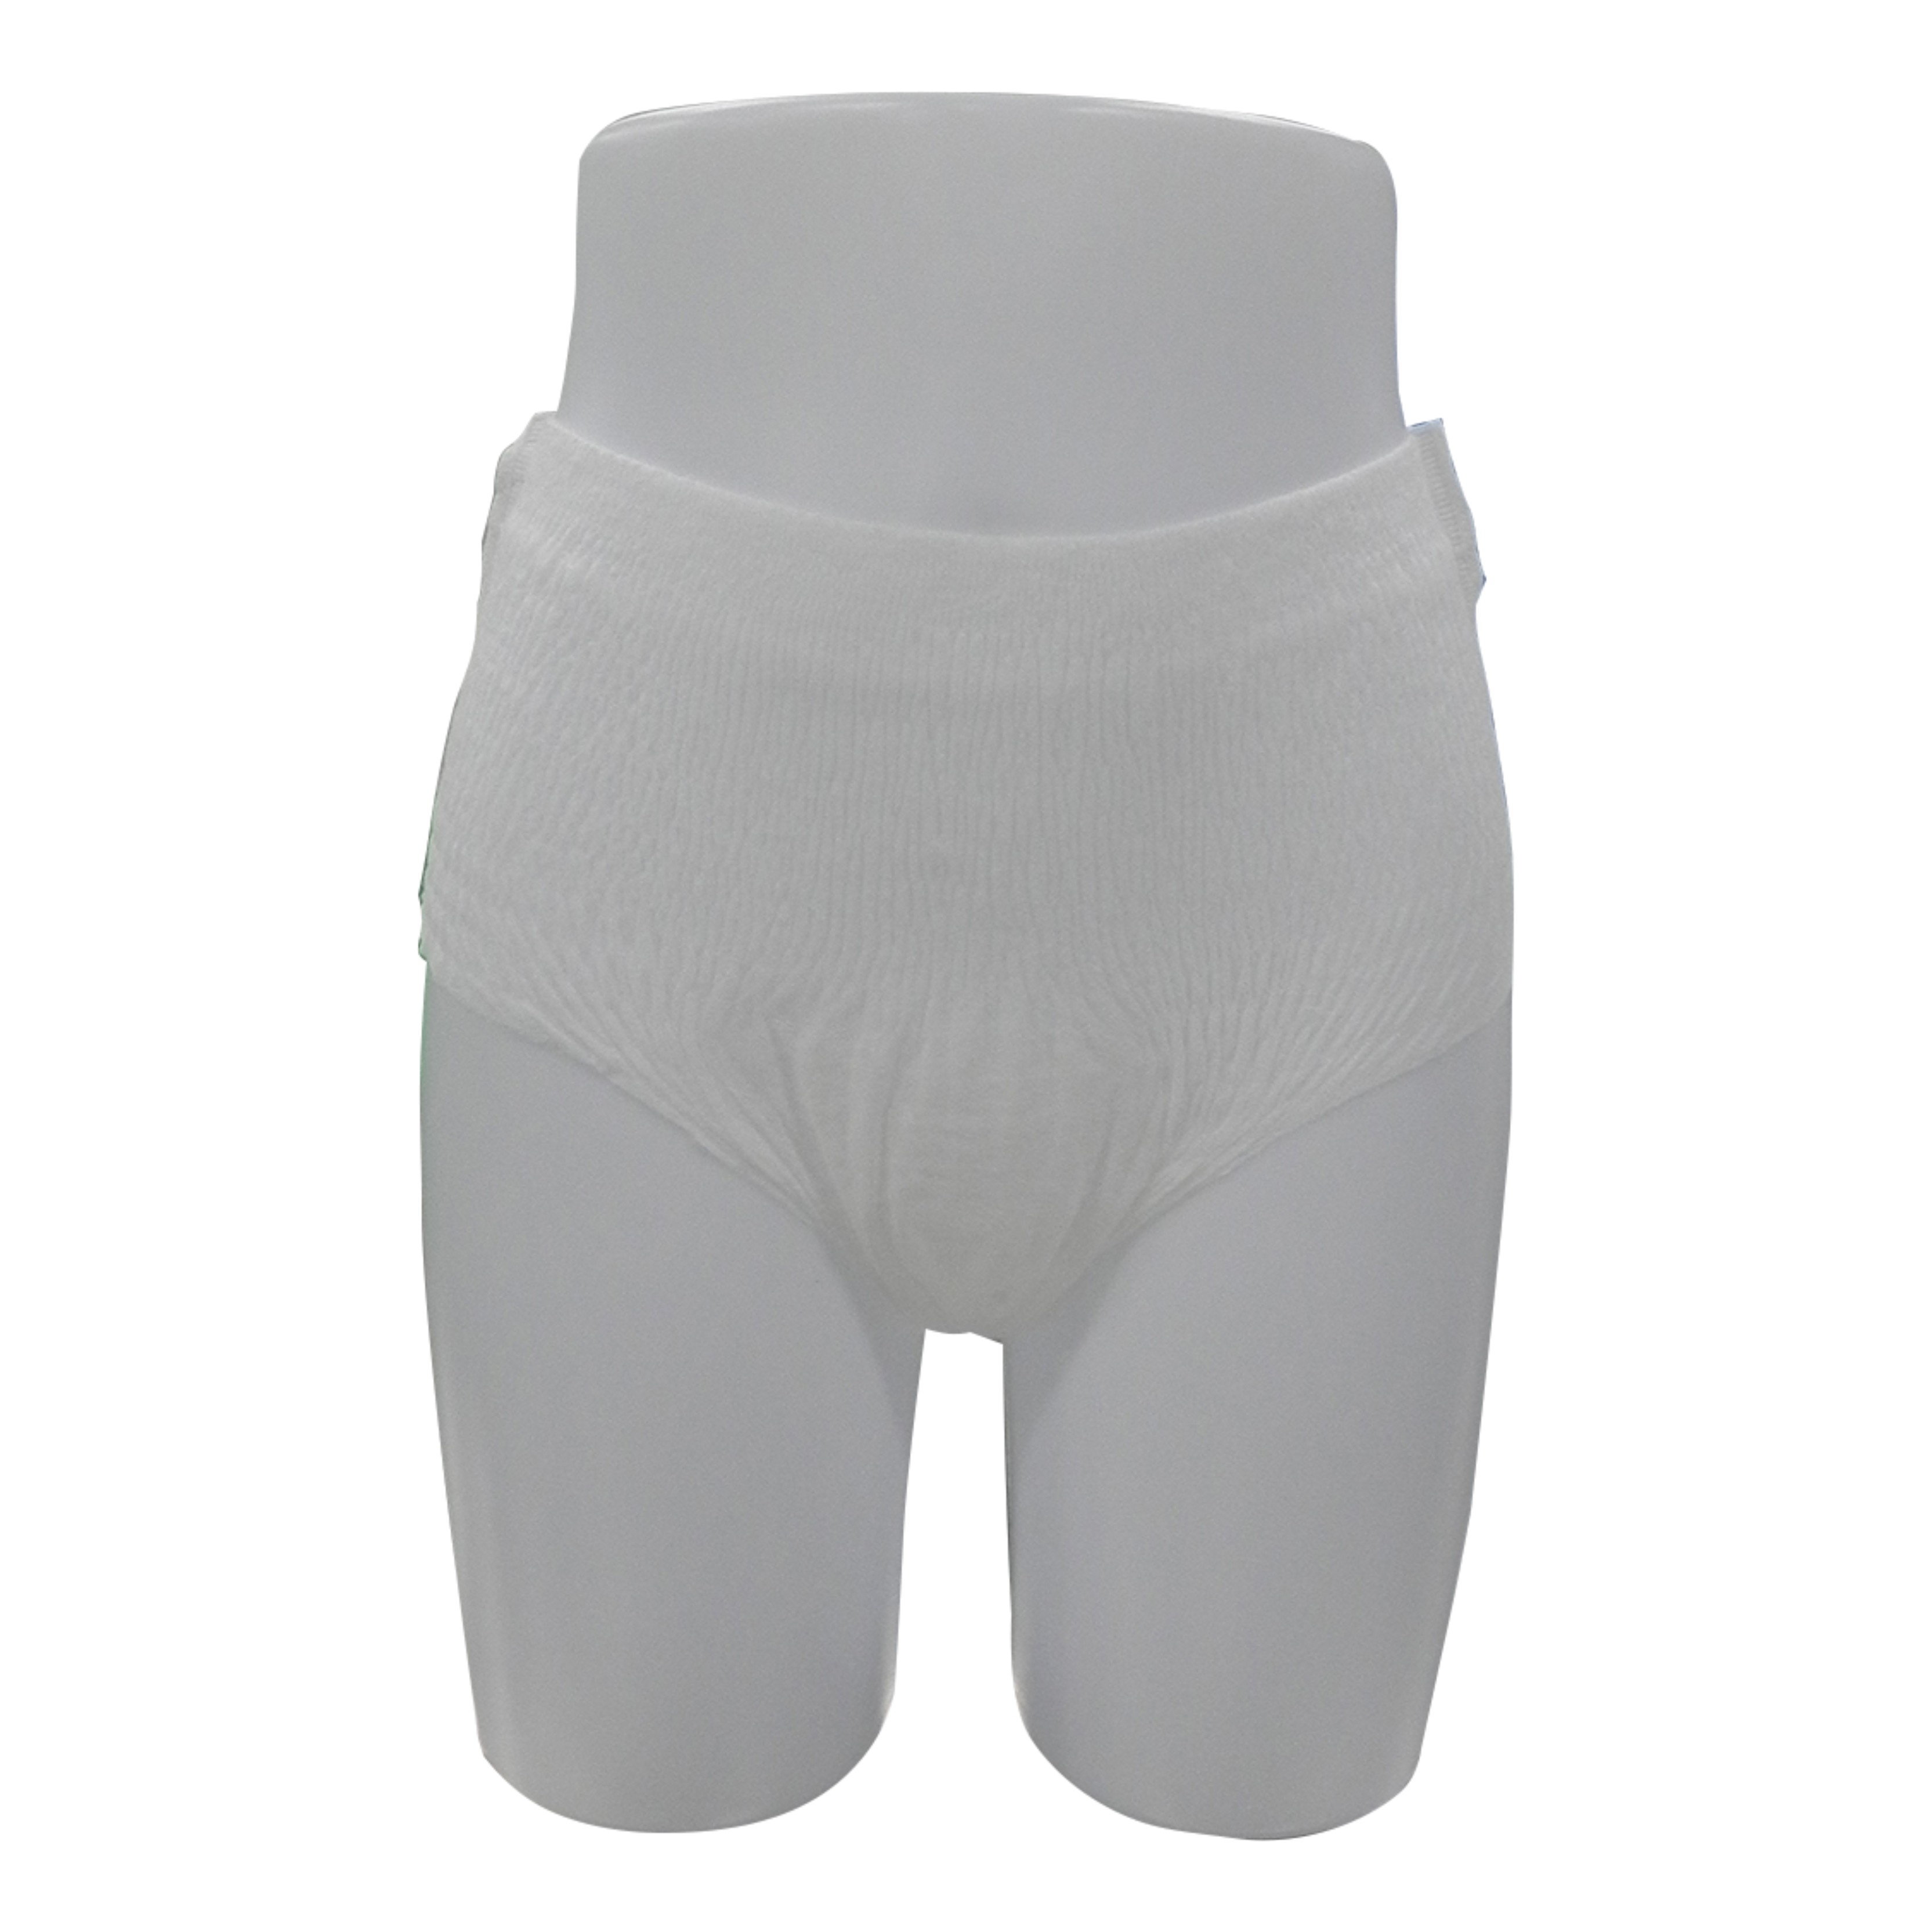 China Manufacturer for Negative Ion Pads - super sleepy lady women sanitary napkins female period pants in pull up style – Yoho